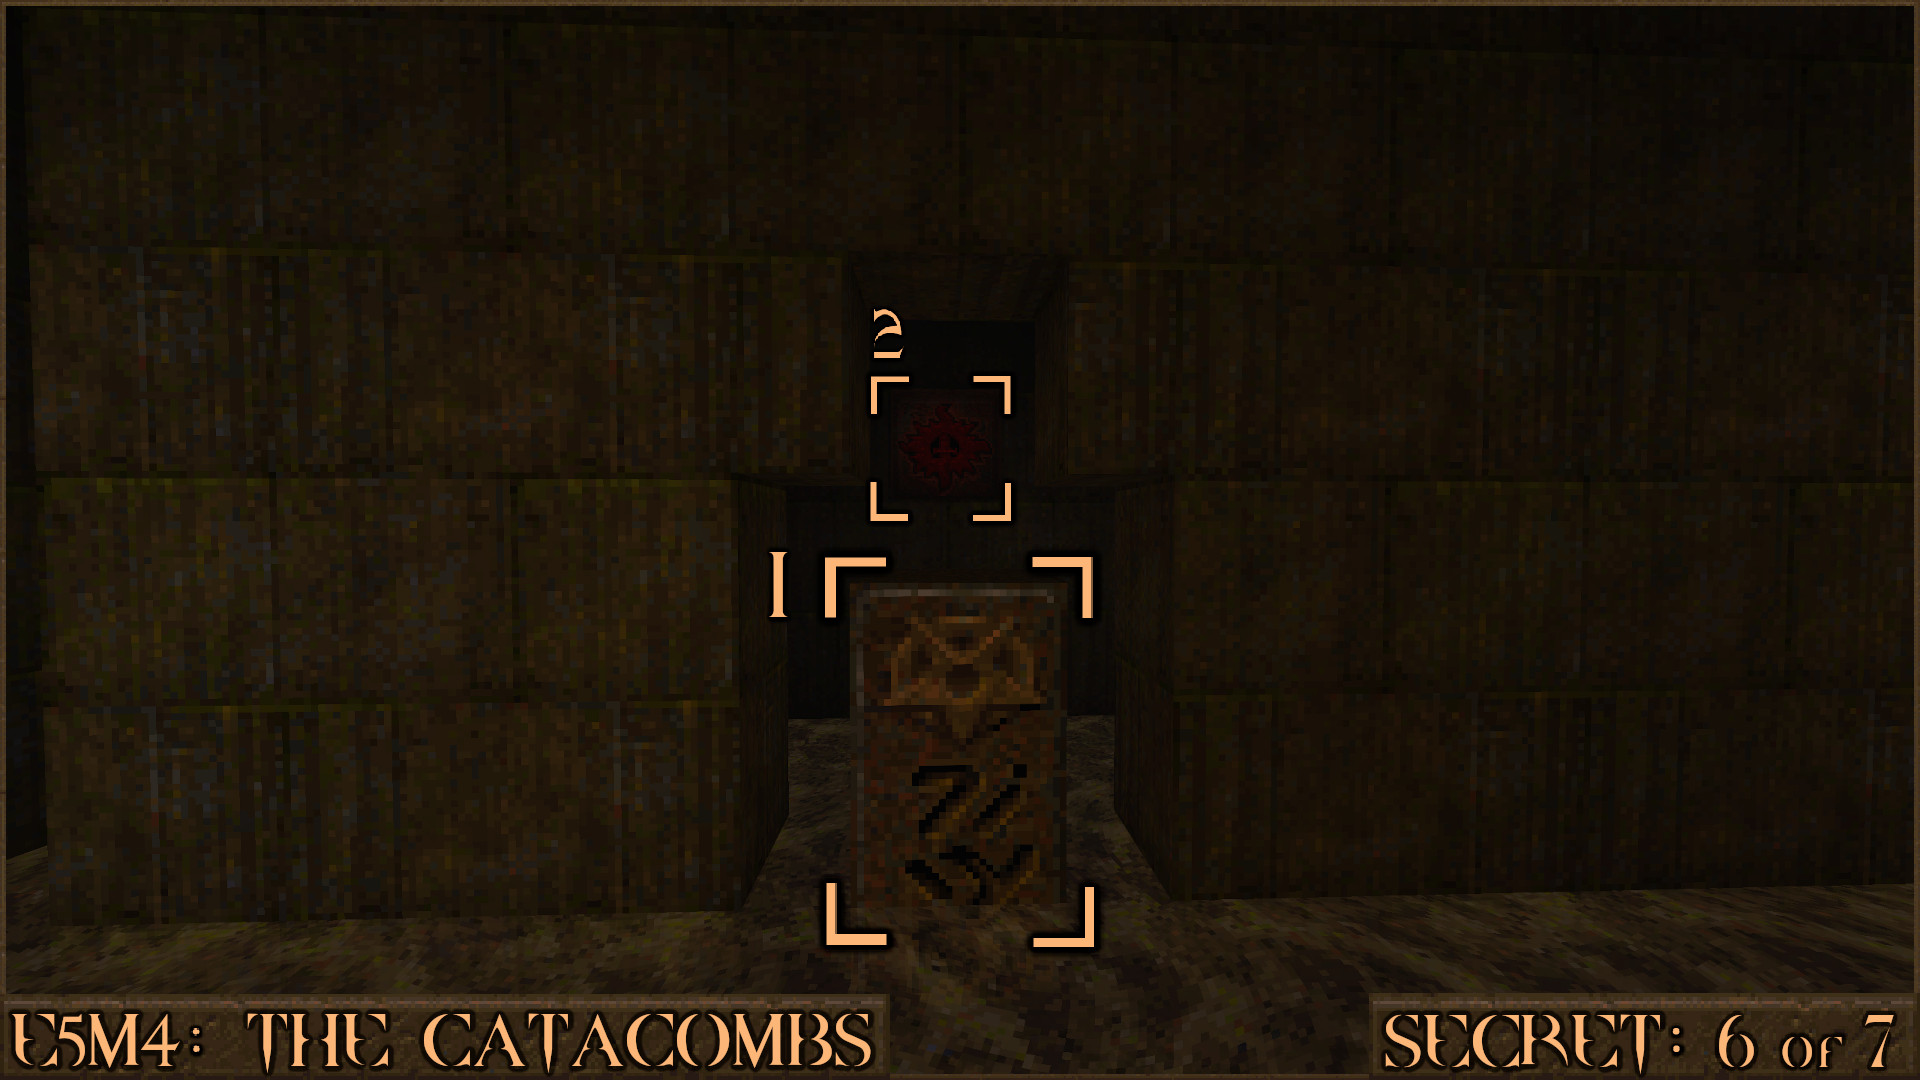 Quake Finding All Secrets in Quake Expansion pack: Dimension of the Past - E5M4: The Catacombs - B0C7CB1